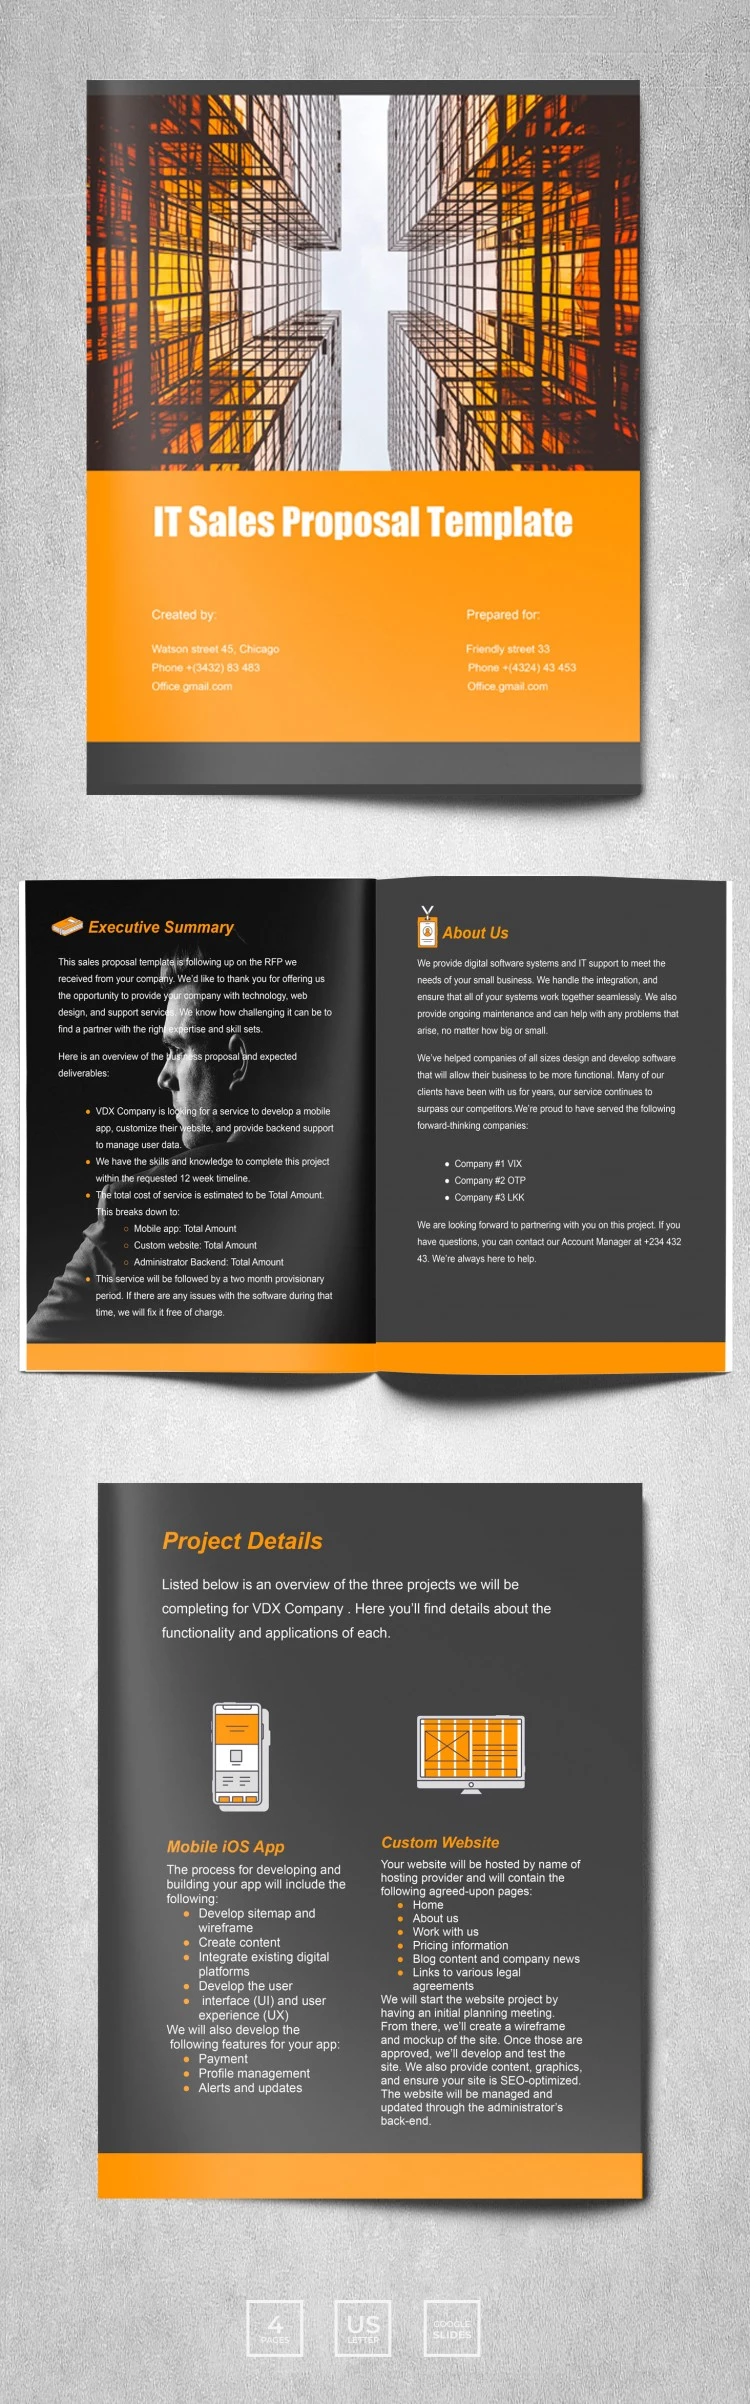 Simple Business Proposal - free Google Docs Template - 10061872